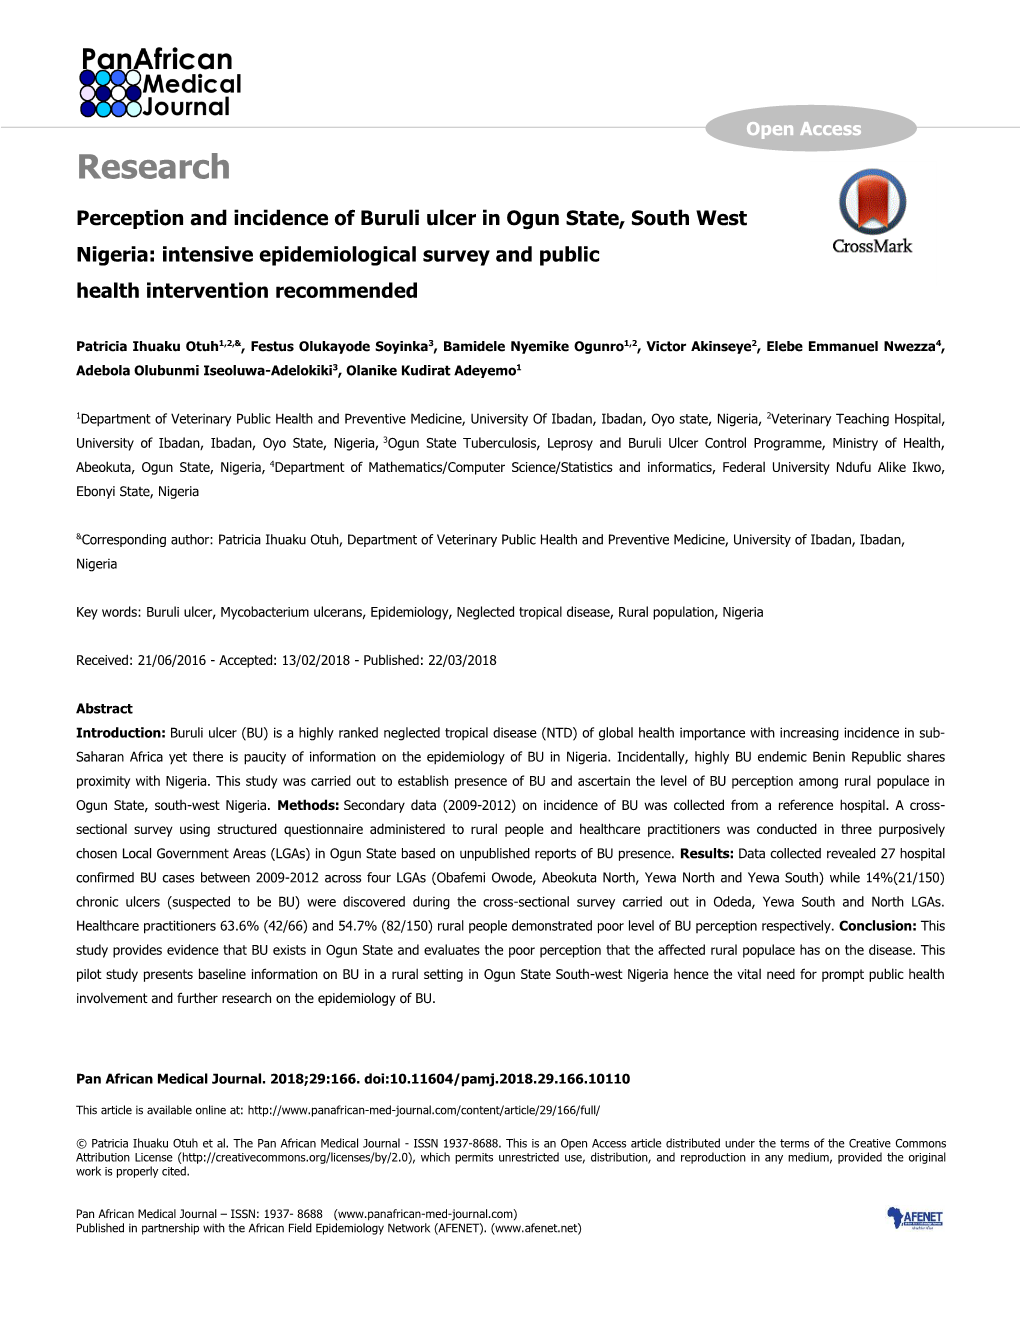 Perception and Incidence of Buruli Ulcer in Ogun State, South West Nigeria: Intensive Epidemiological Survey and Public Health Intervention Recommended